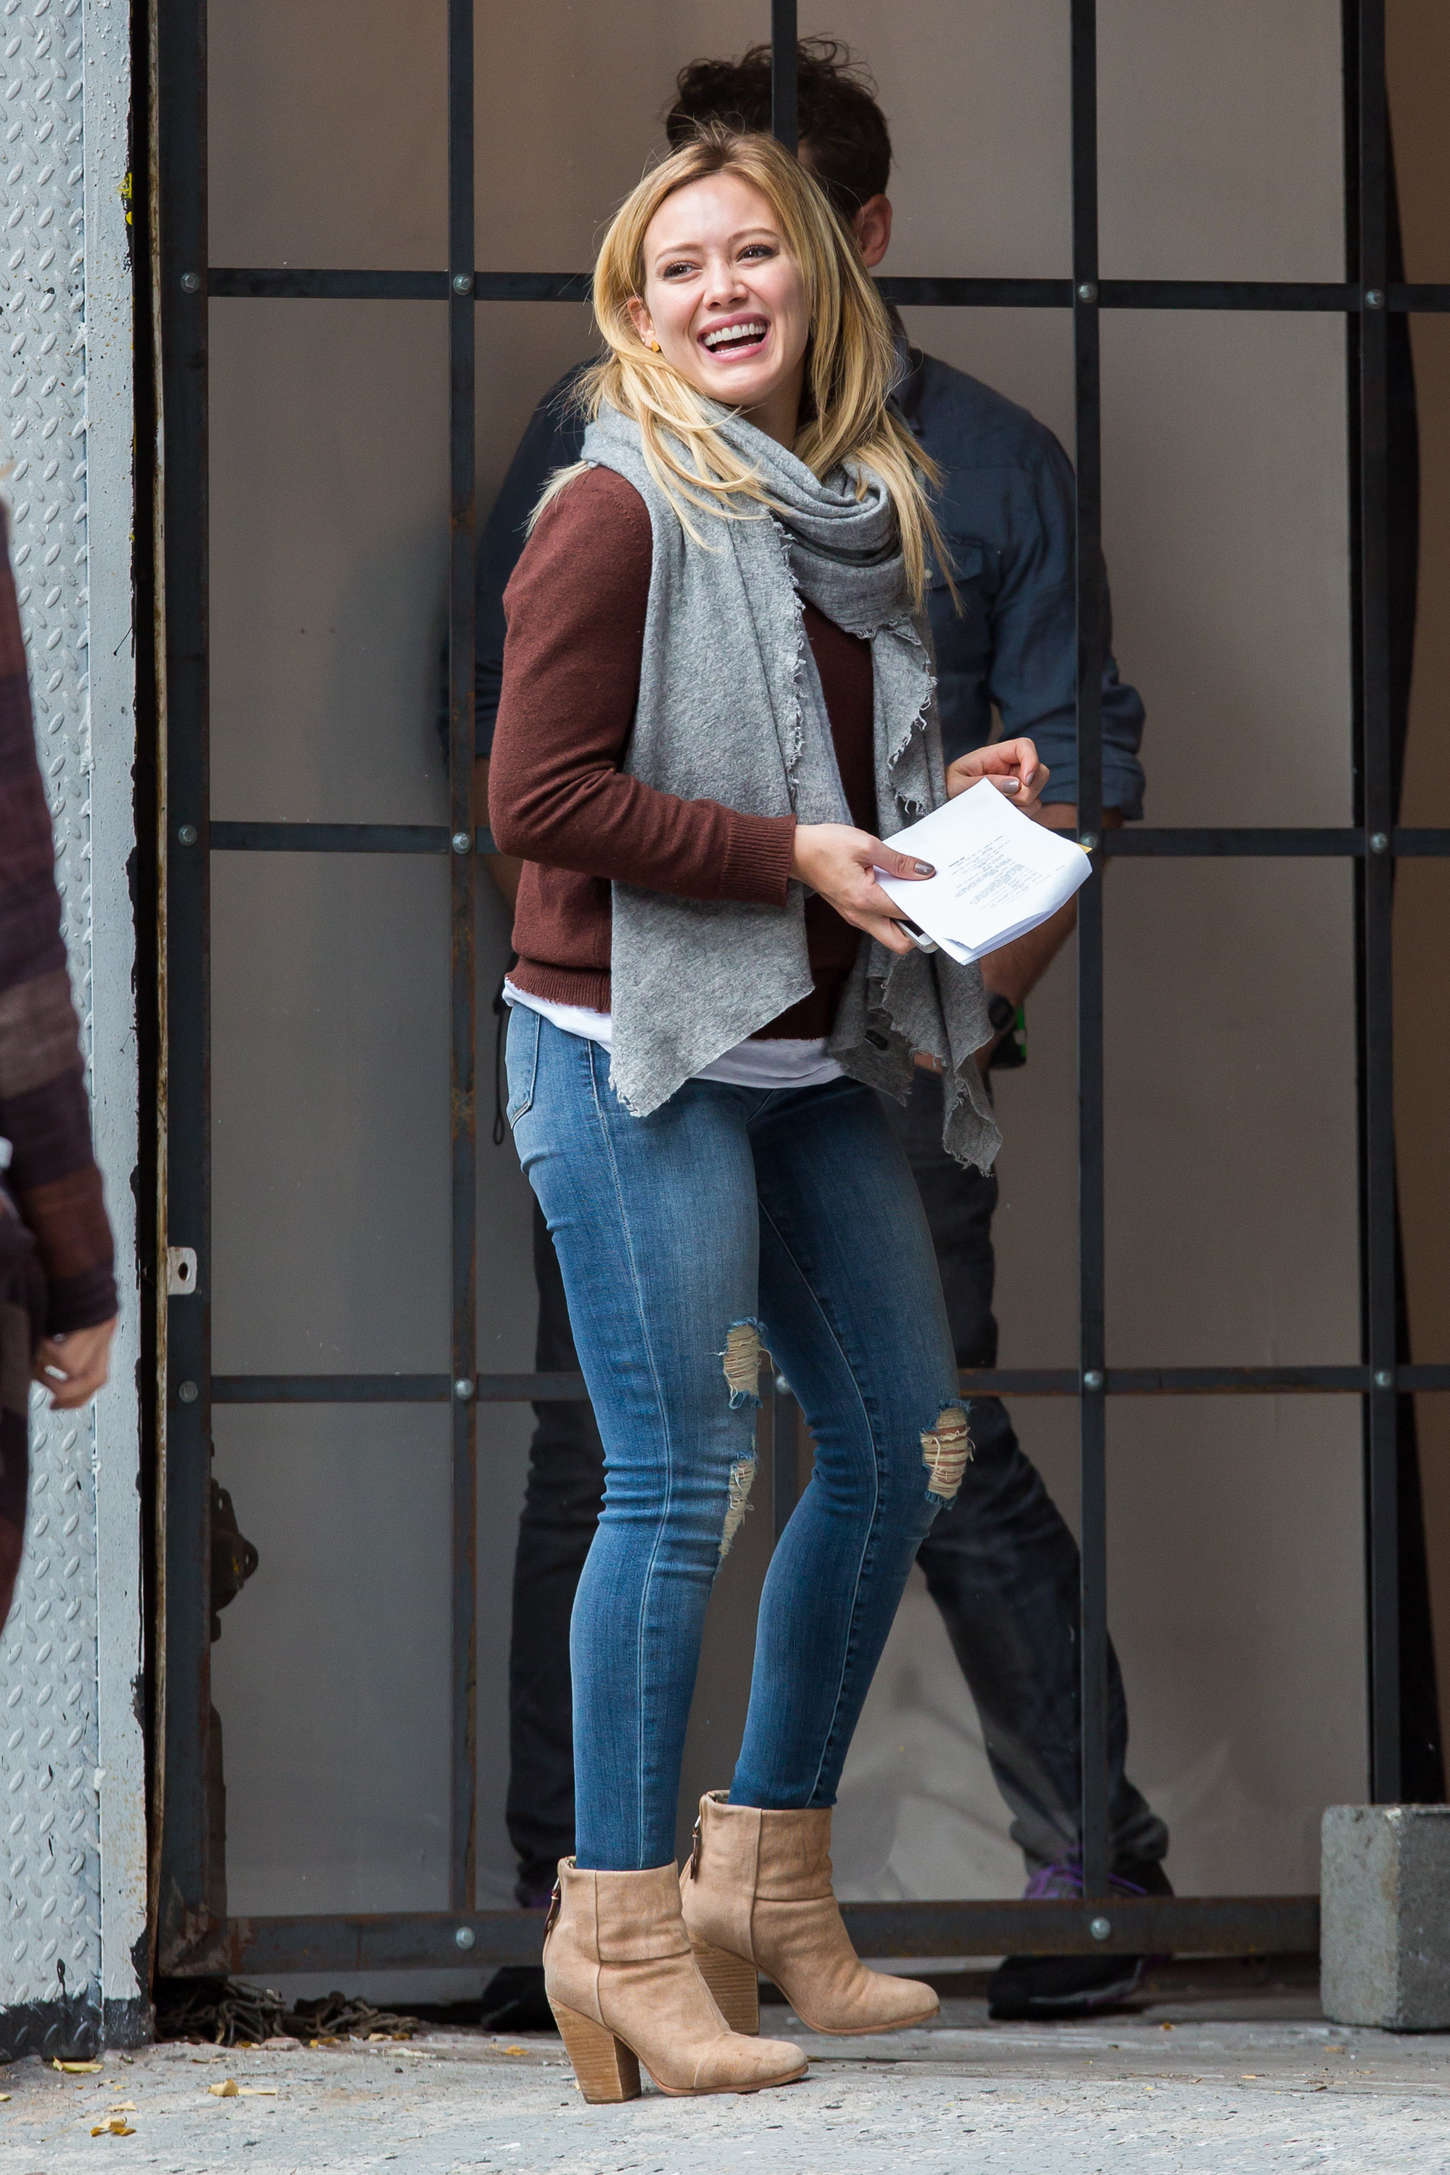 Hilary Duff 2014 : Hilary Duff in Ripped Jeans on Younger set -10. 